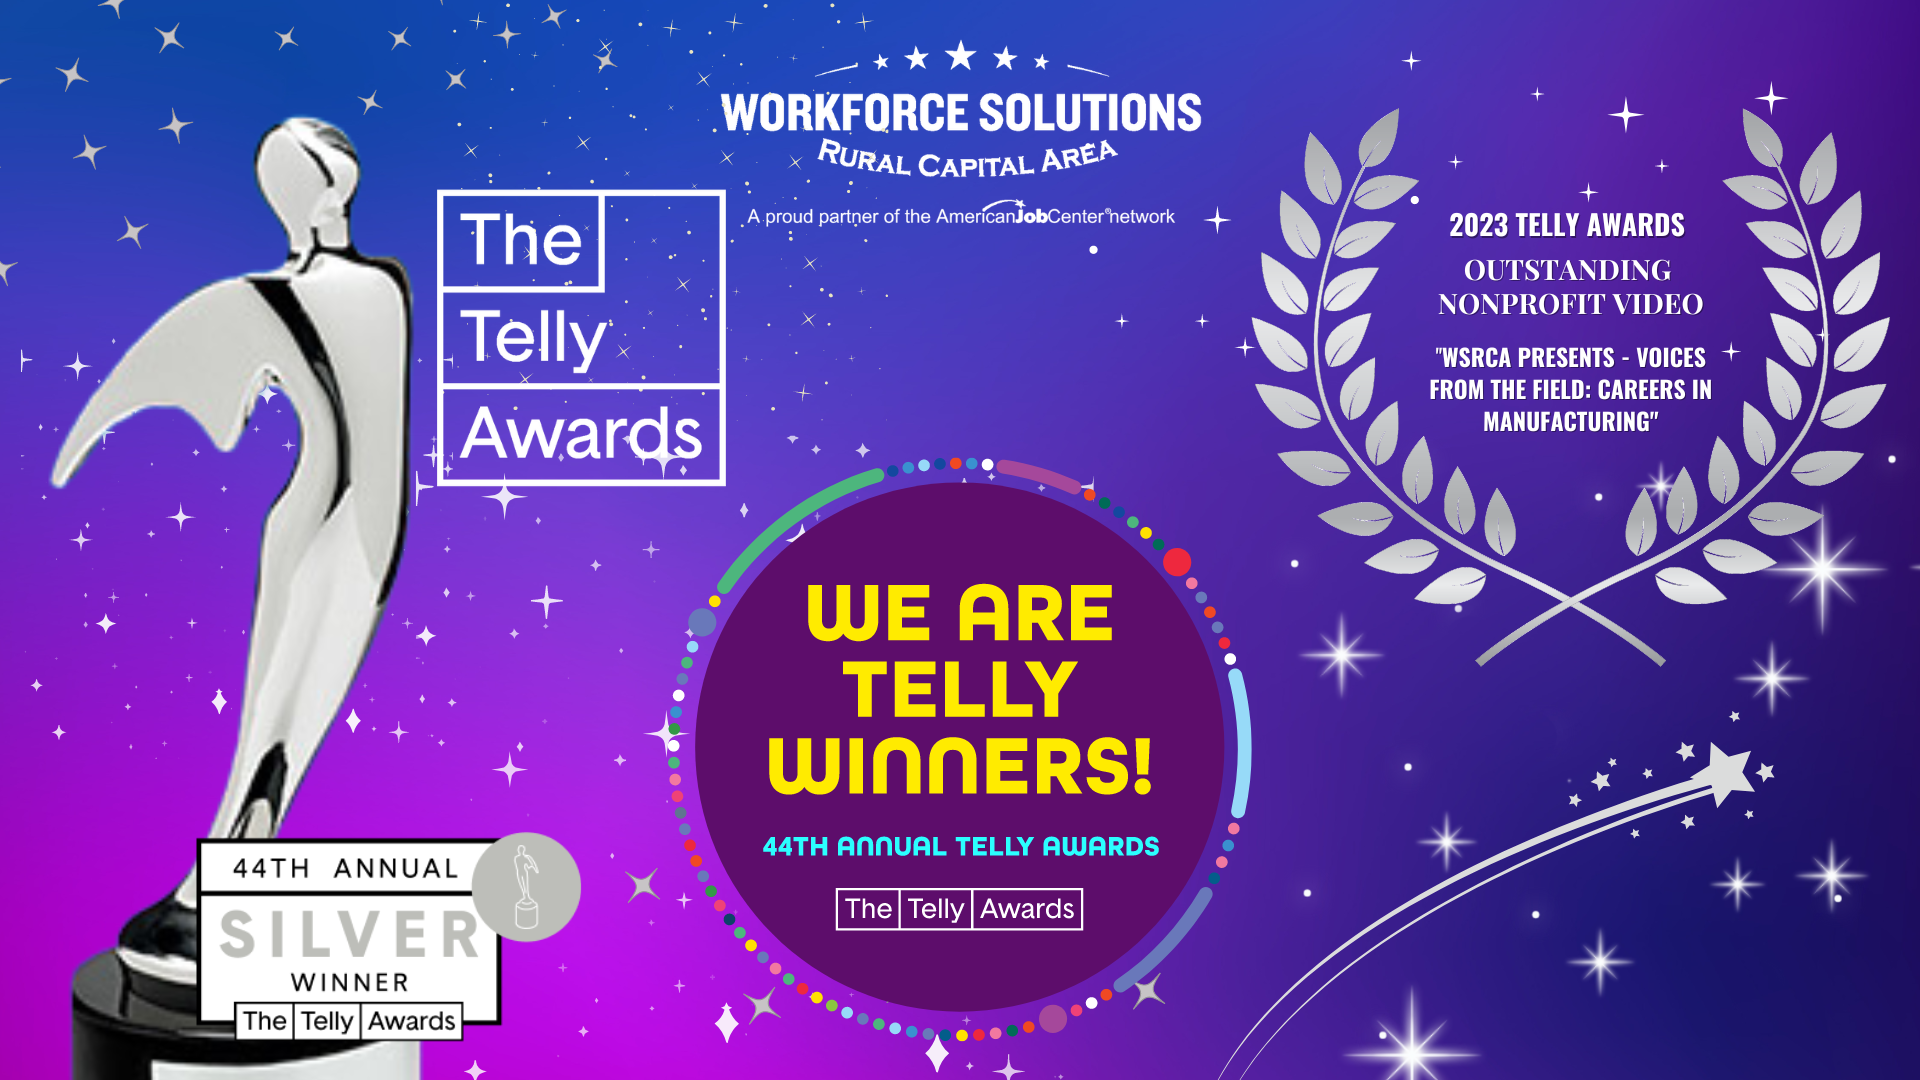 WSRCA Honored by 44th Annual Telly Awards